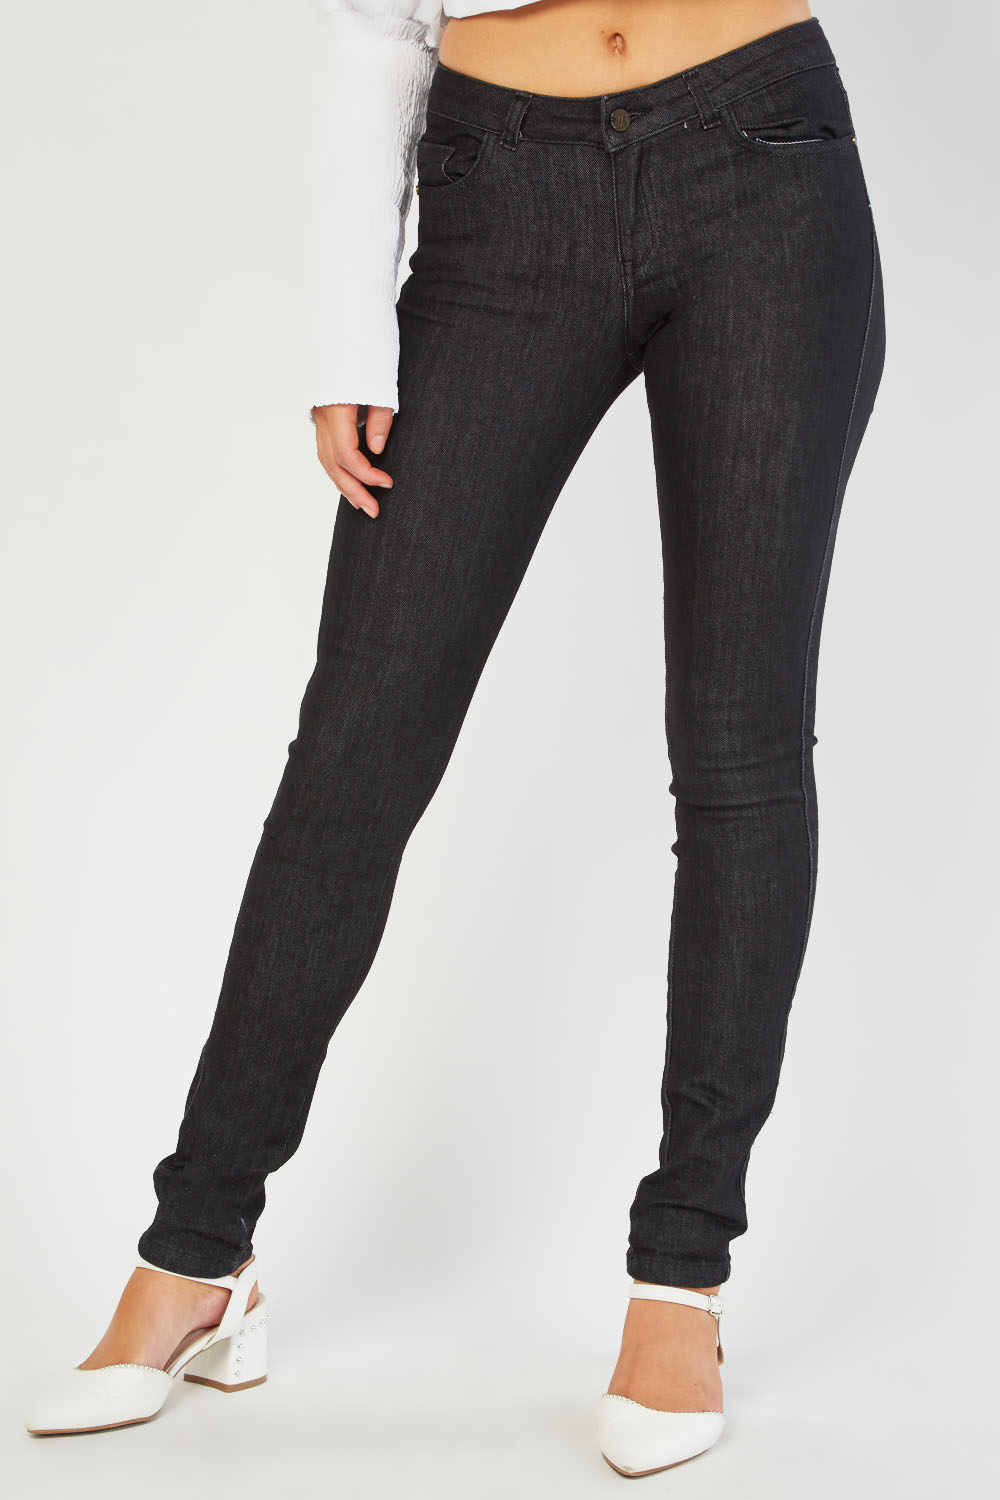 Charcoal Skinny Jeans - Just $7